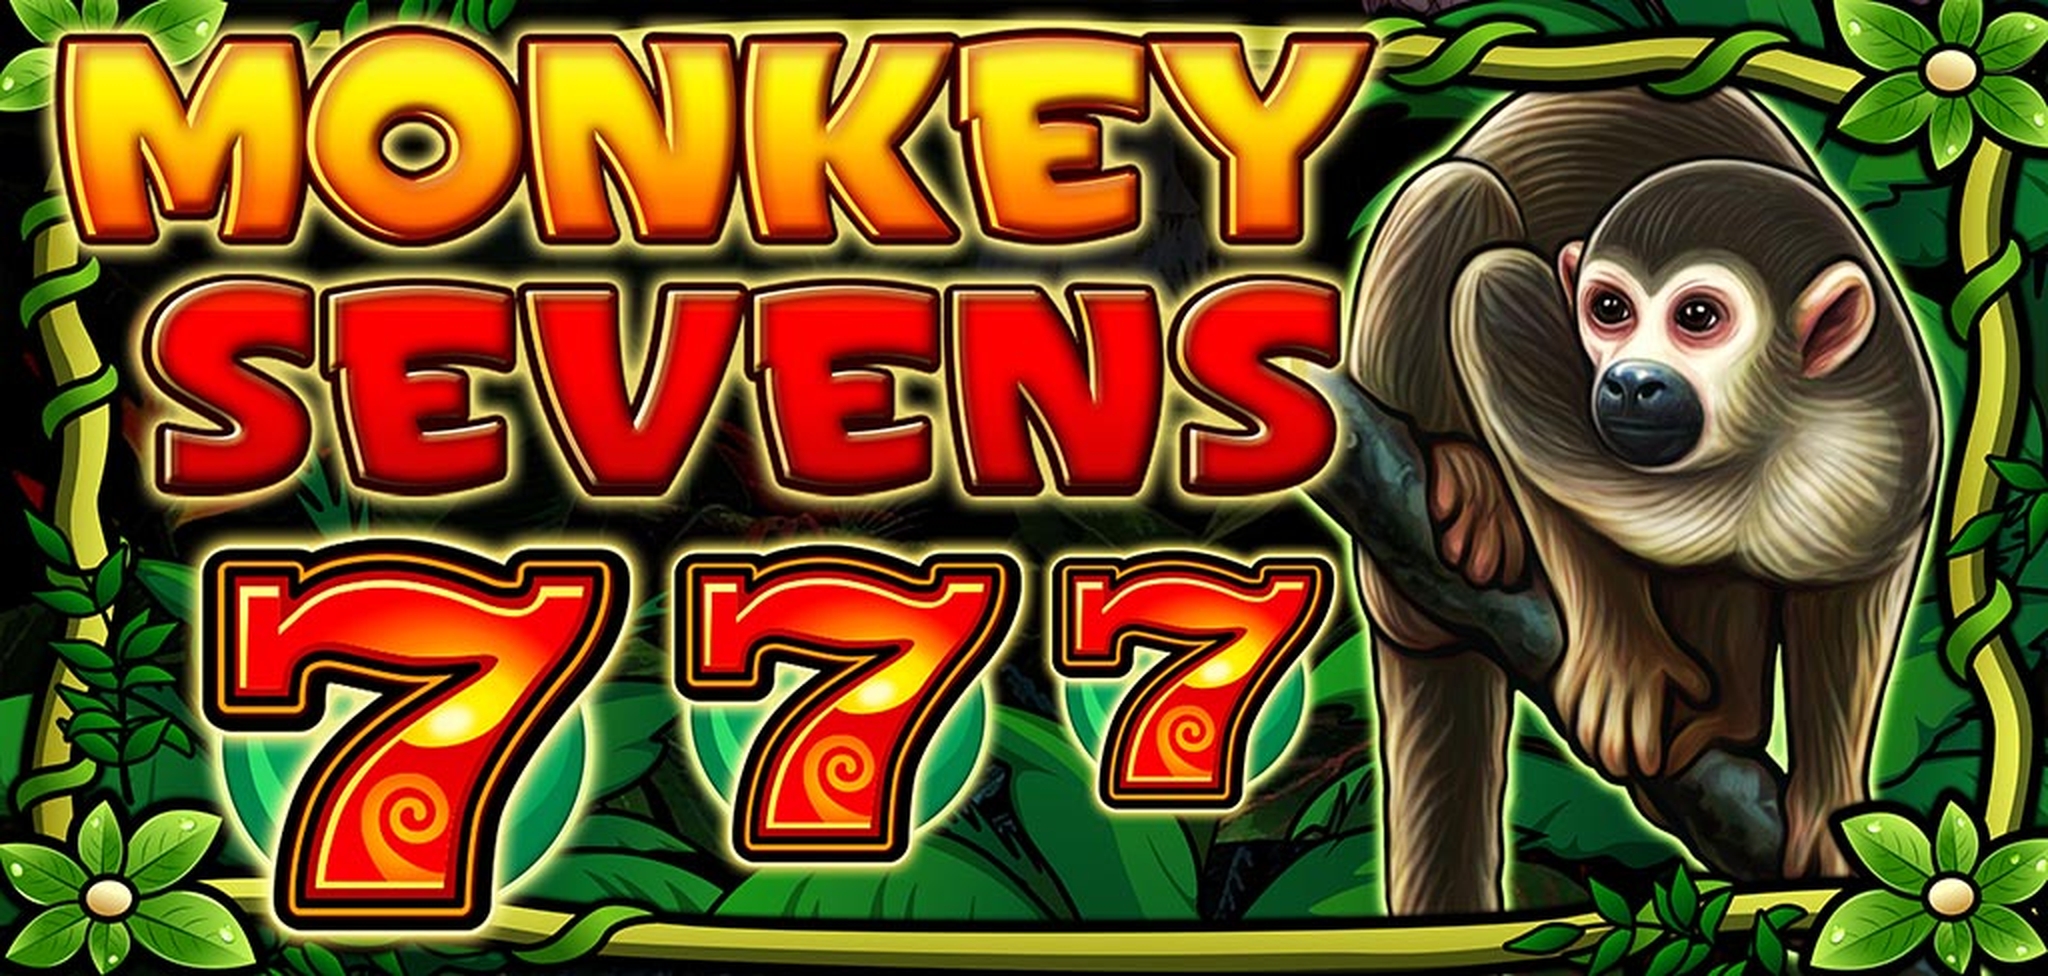 The Monkey Sevens Online Slot Demo Game by casino technology